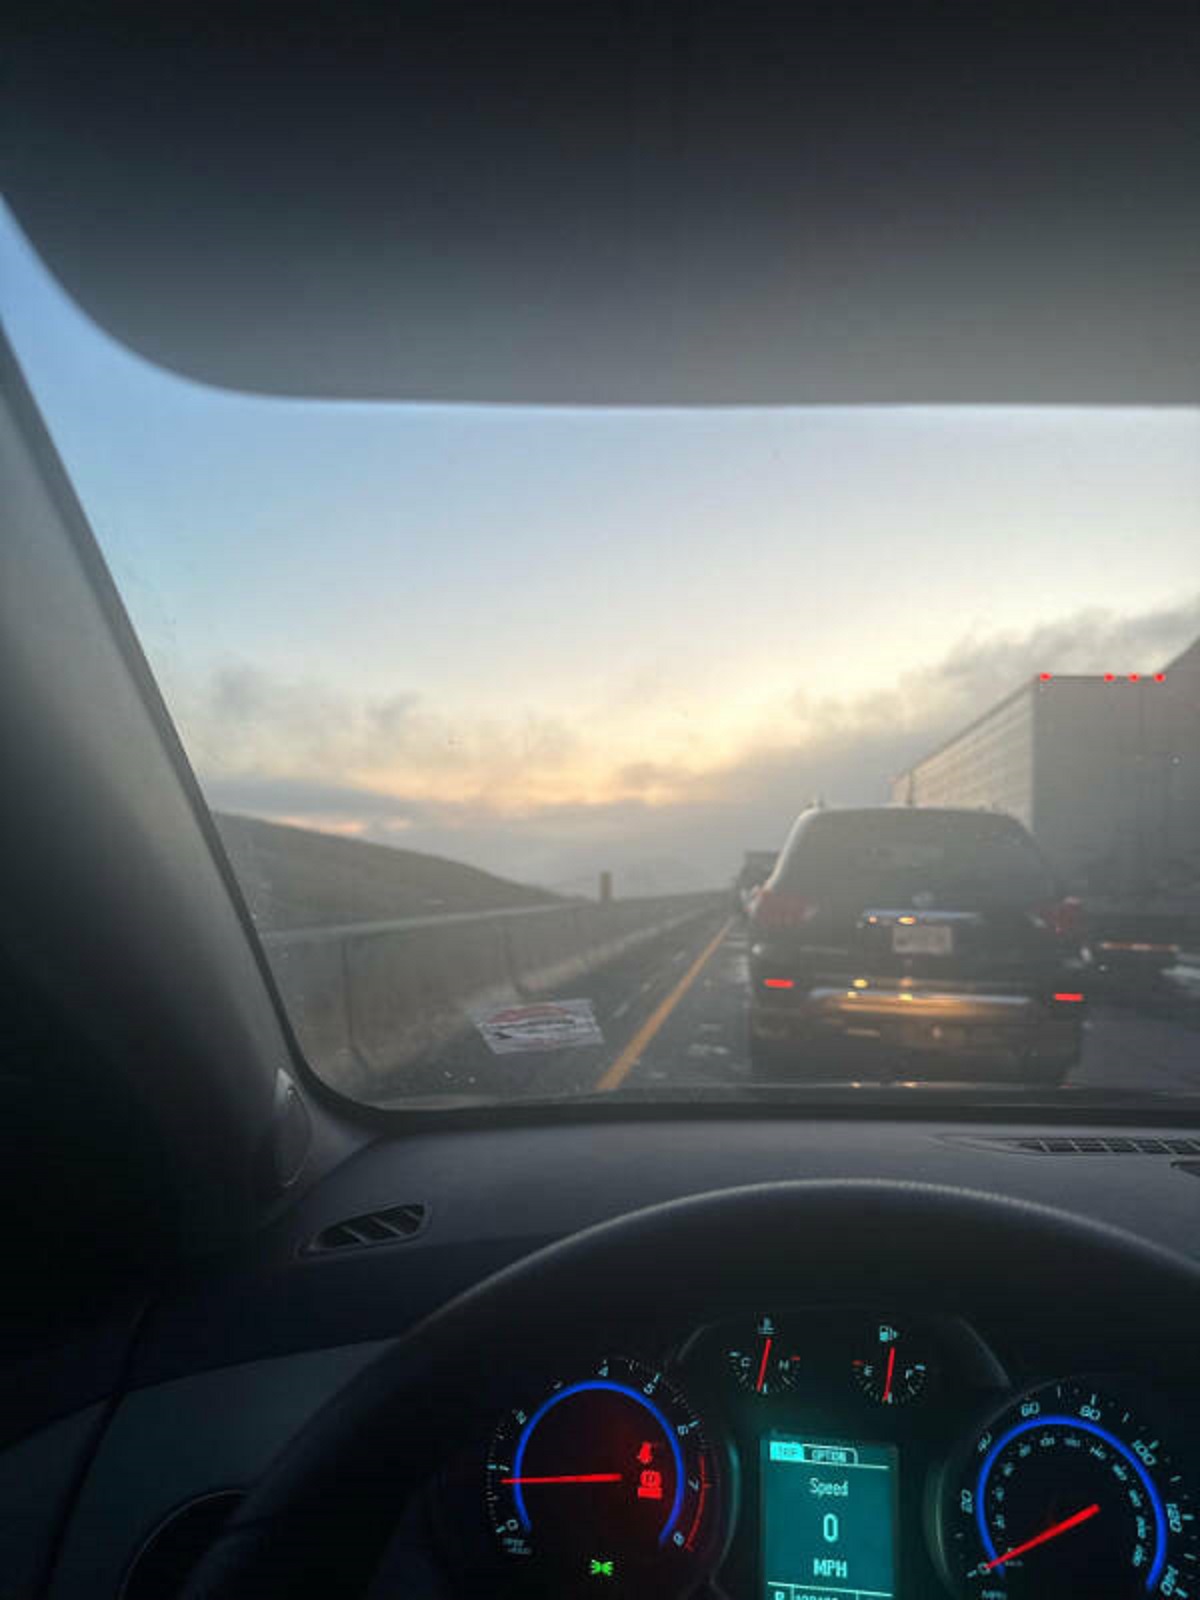 “I've been stuck in traffic for seven hours on I84 westbound. No option to turn around.”